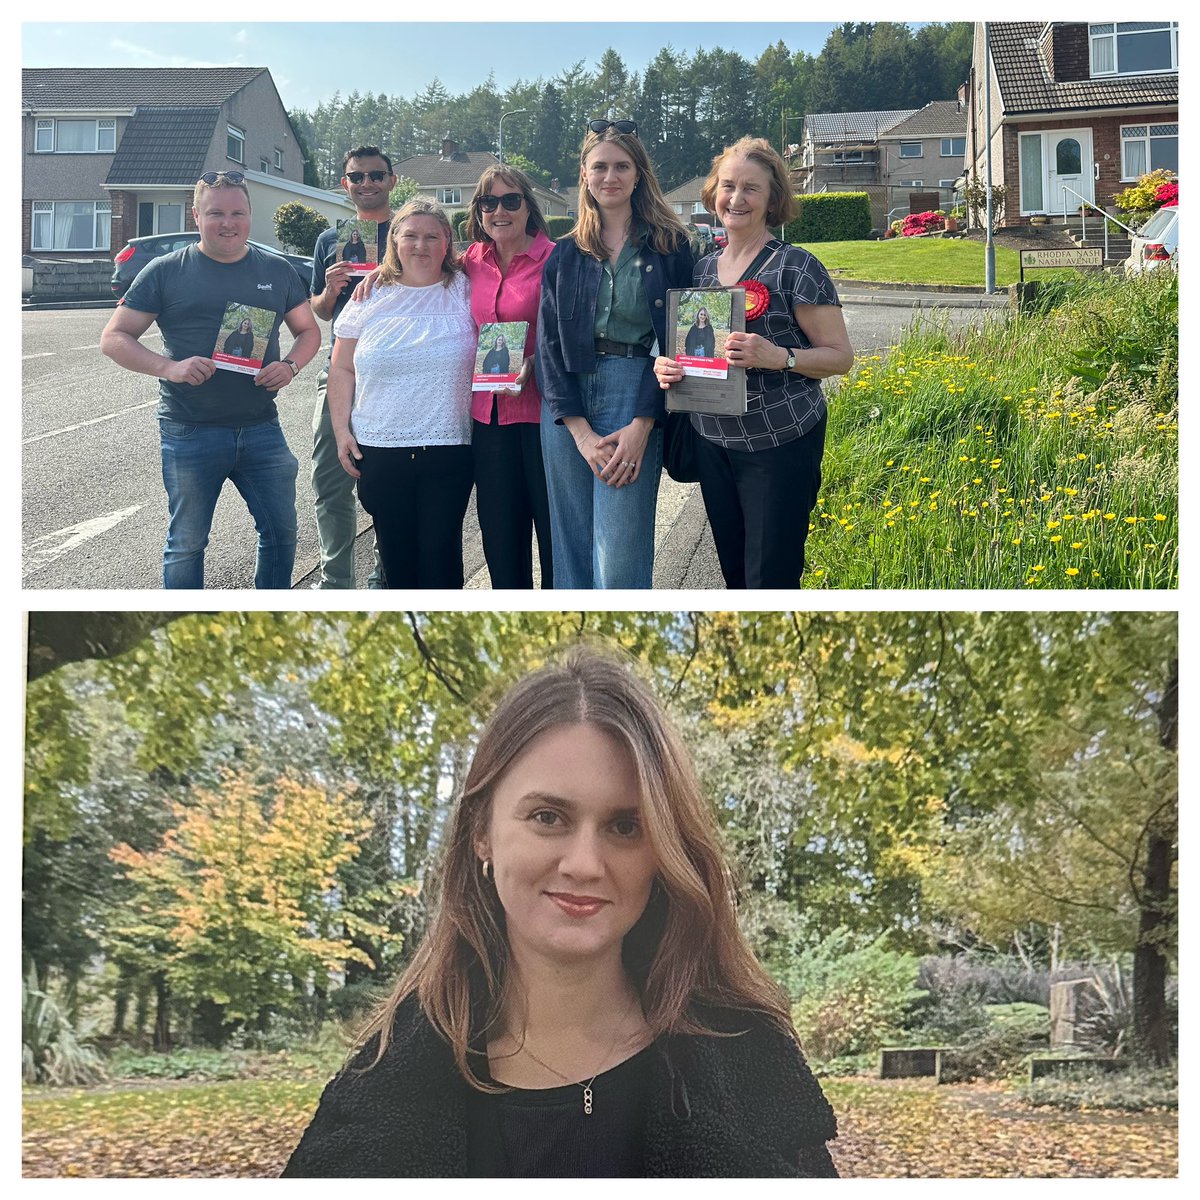 Headed down west today to campaign with the fantastic @MarthaAngharad our @WelshLabour @UKLabour #GeneralElection candidate for Caerfyrddin. Thanks to all the residents who chatted to our team. Beautiful sunshine & views all day @labourdoorstep_ 🌹